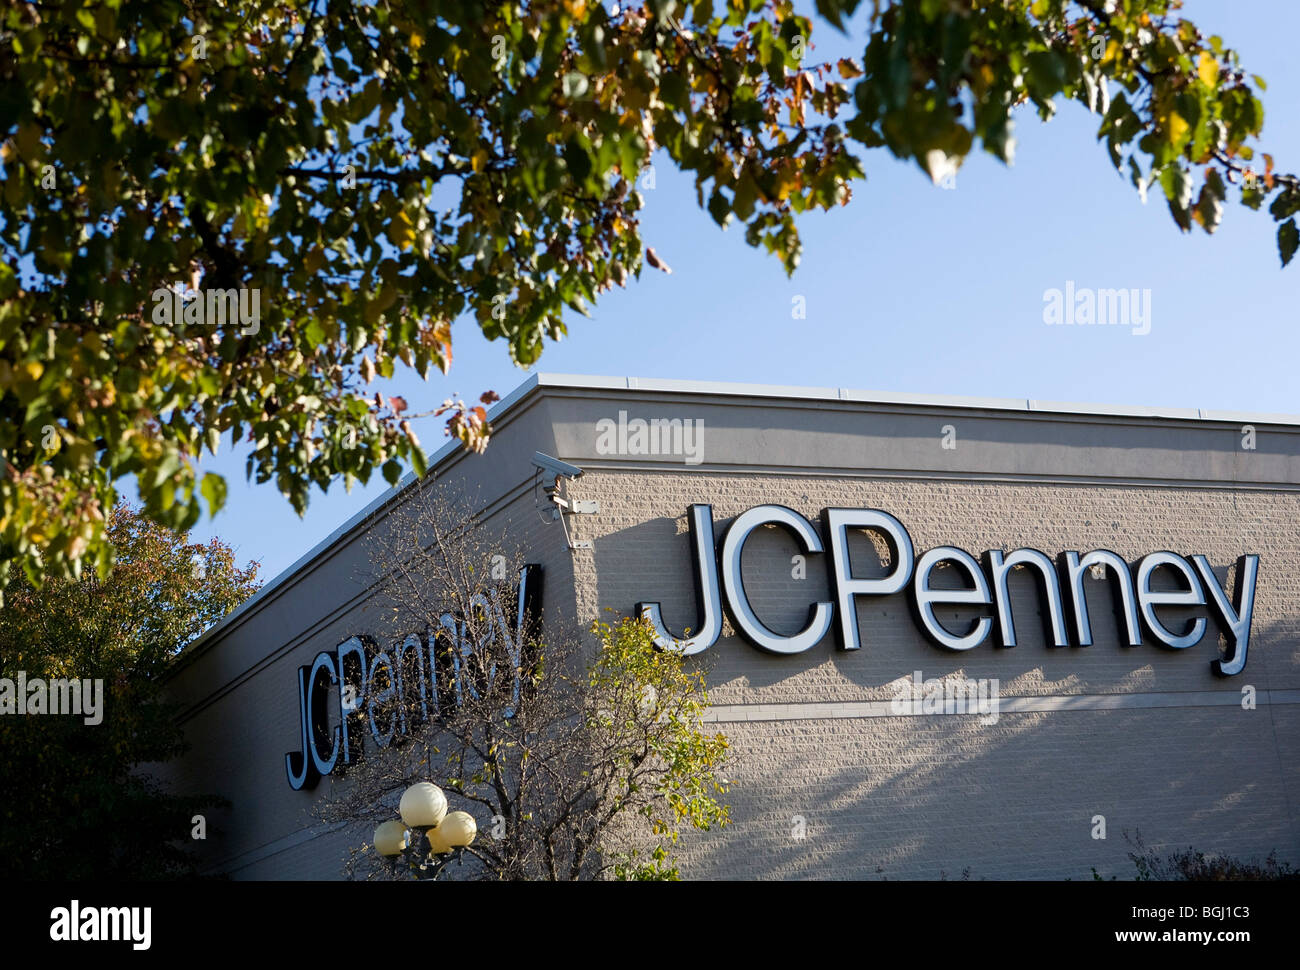 A JCPenney retail store. Stock Photo